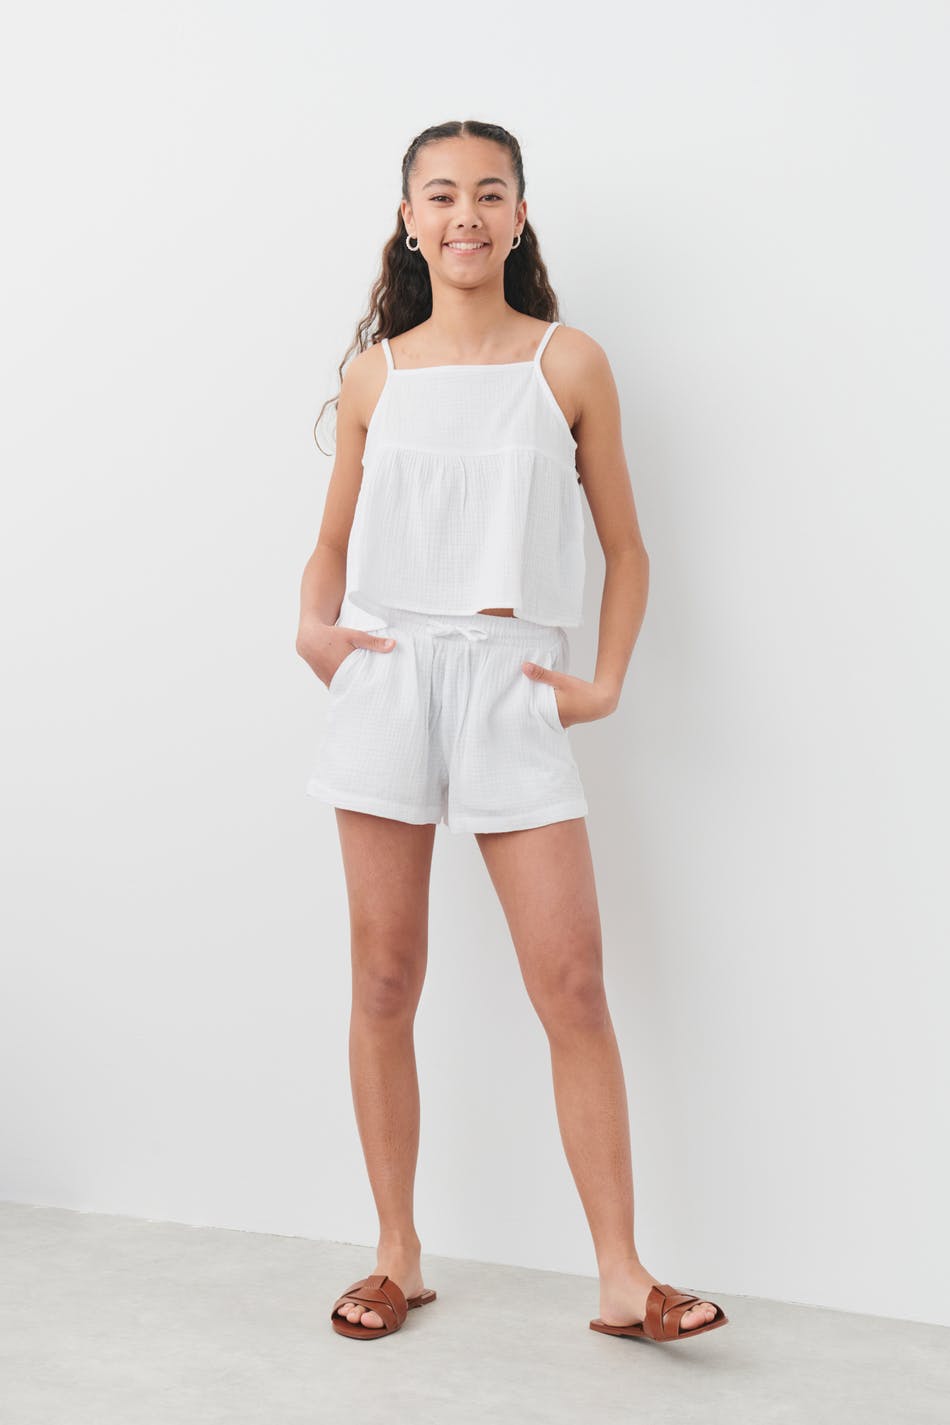 Gina Tricot - Y gauze singlet - young-tops - White - 146/152 - Female